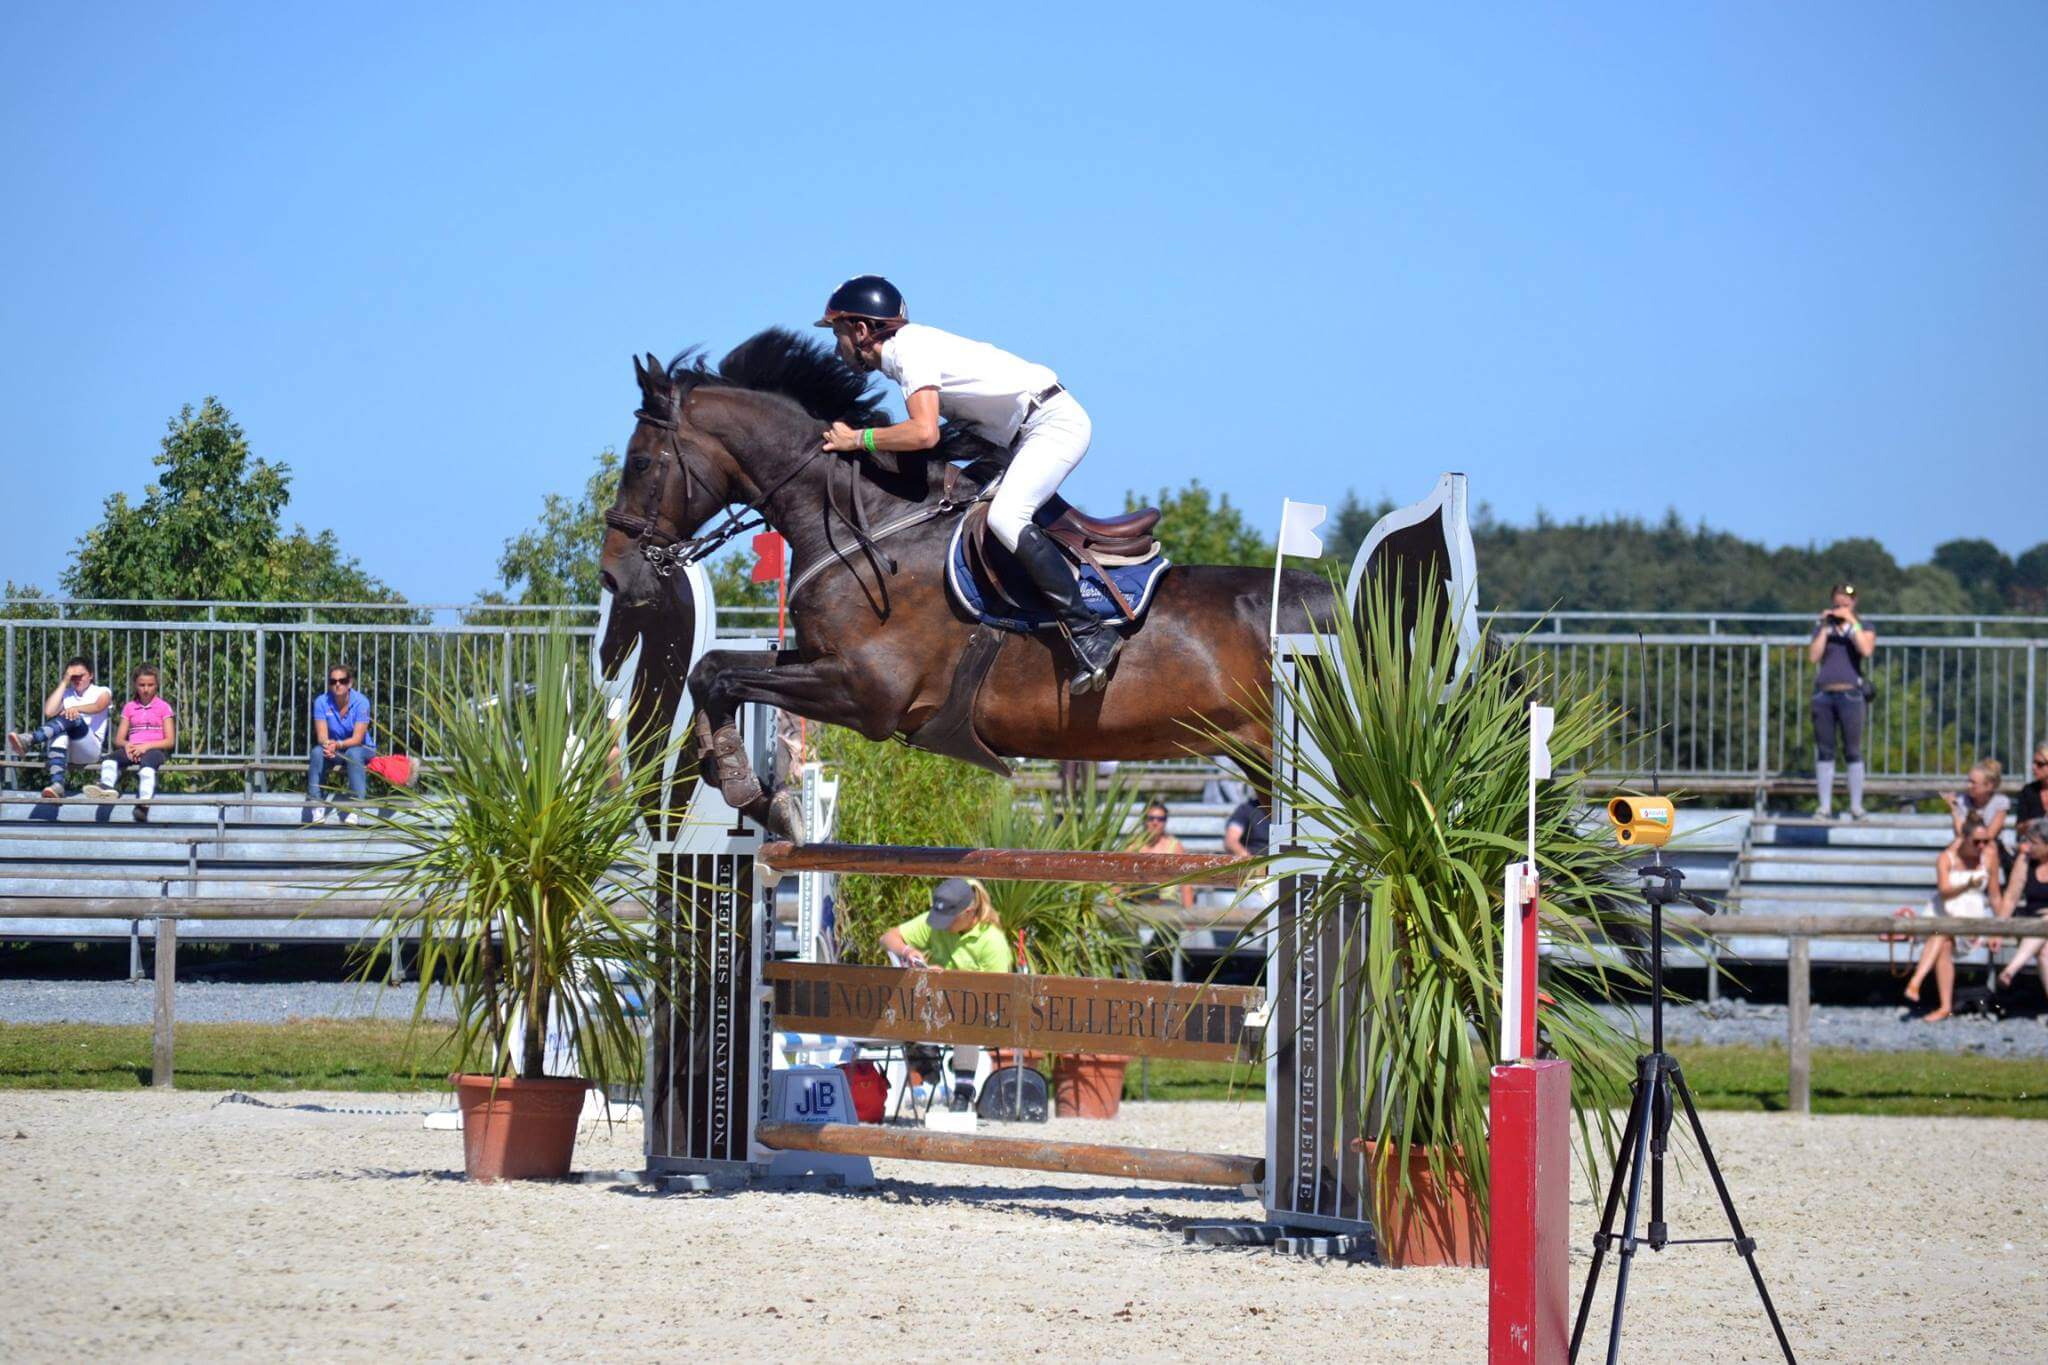 Rider participating in show jumping